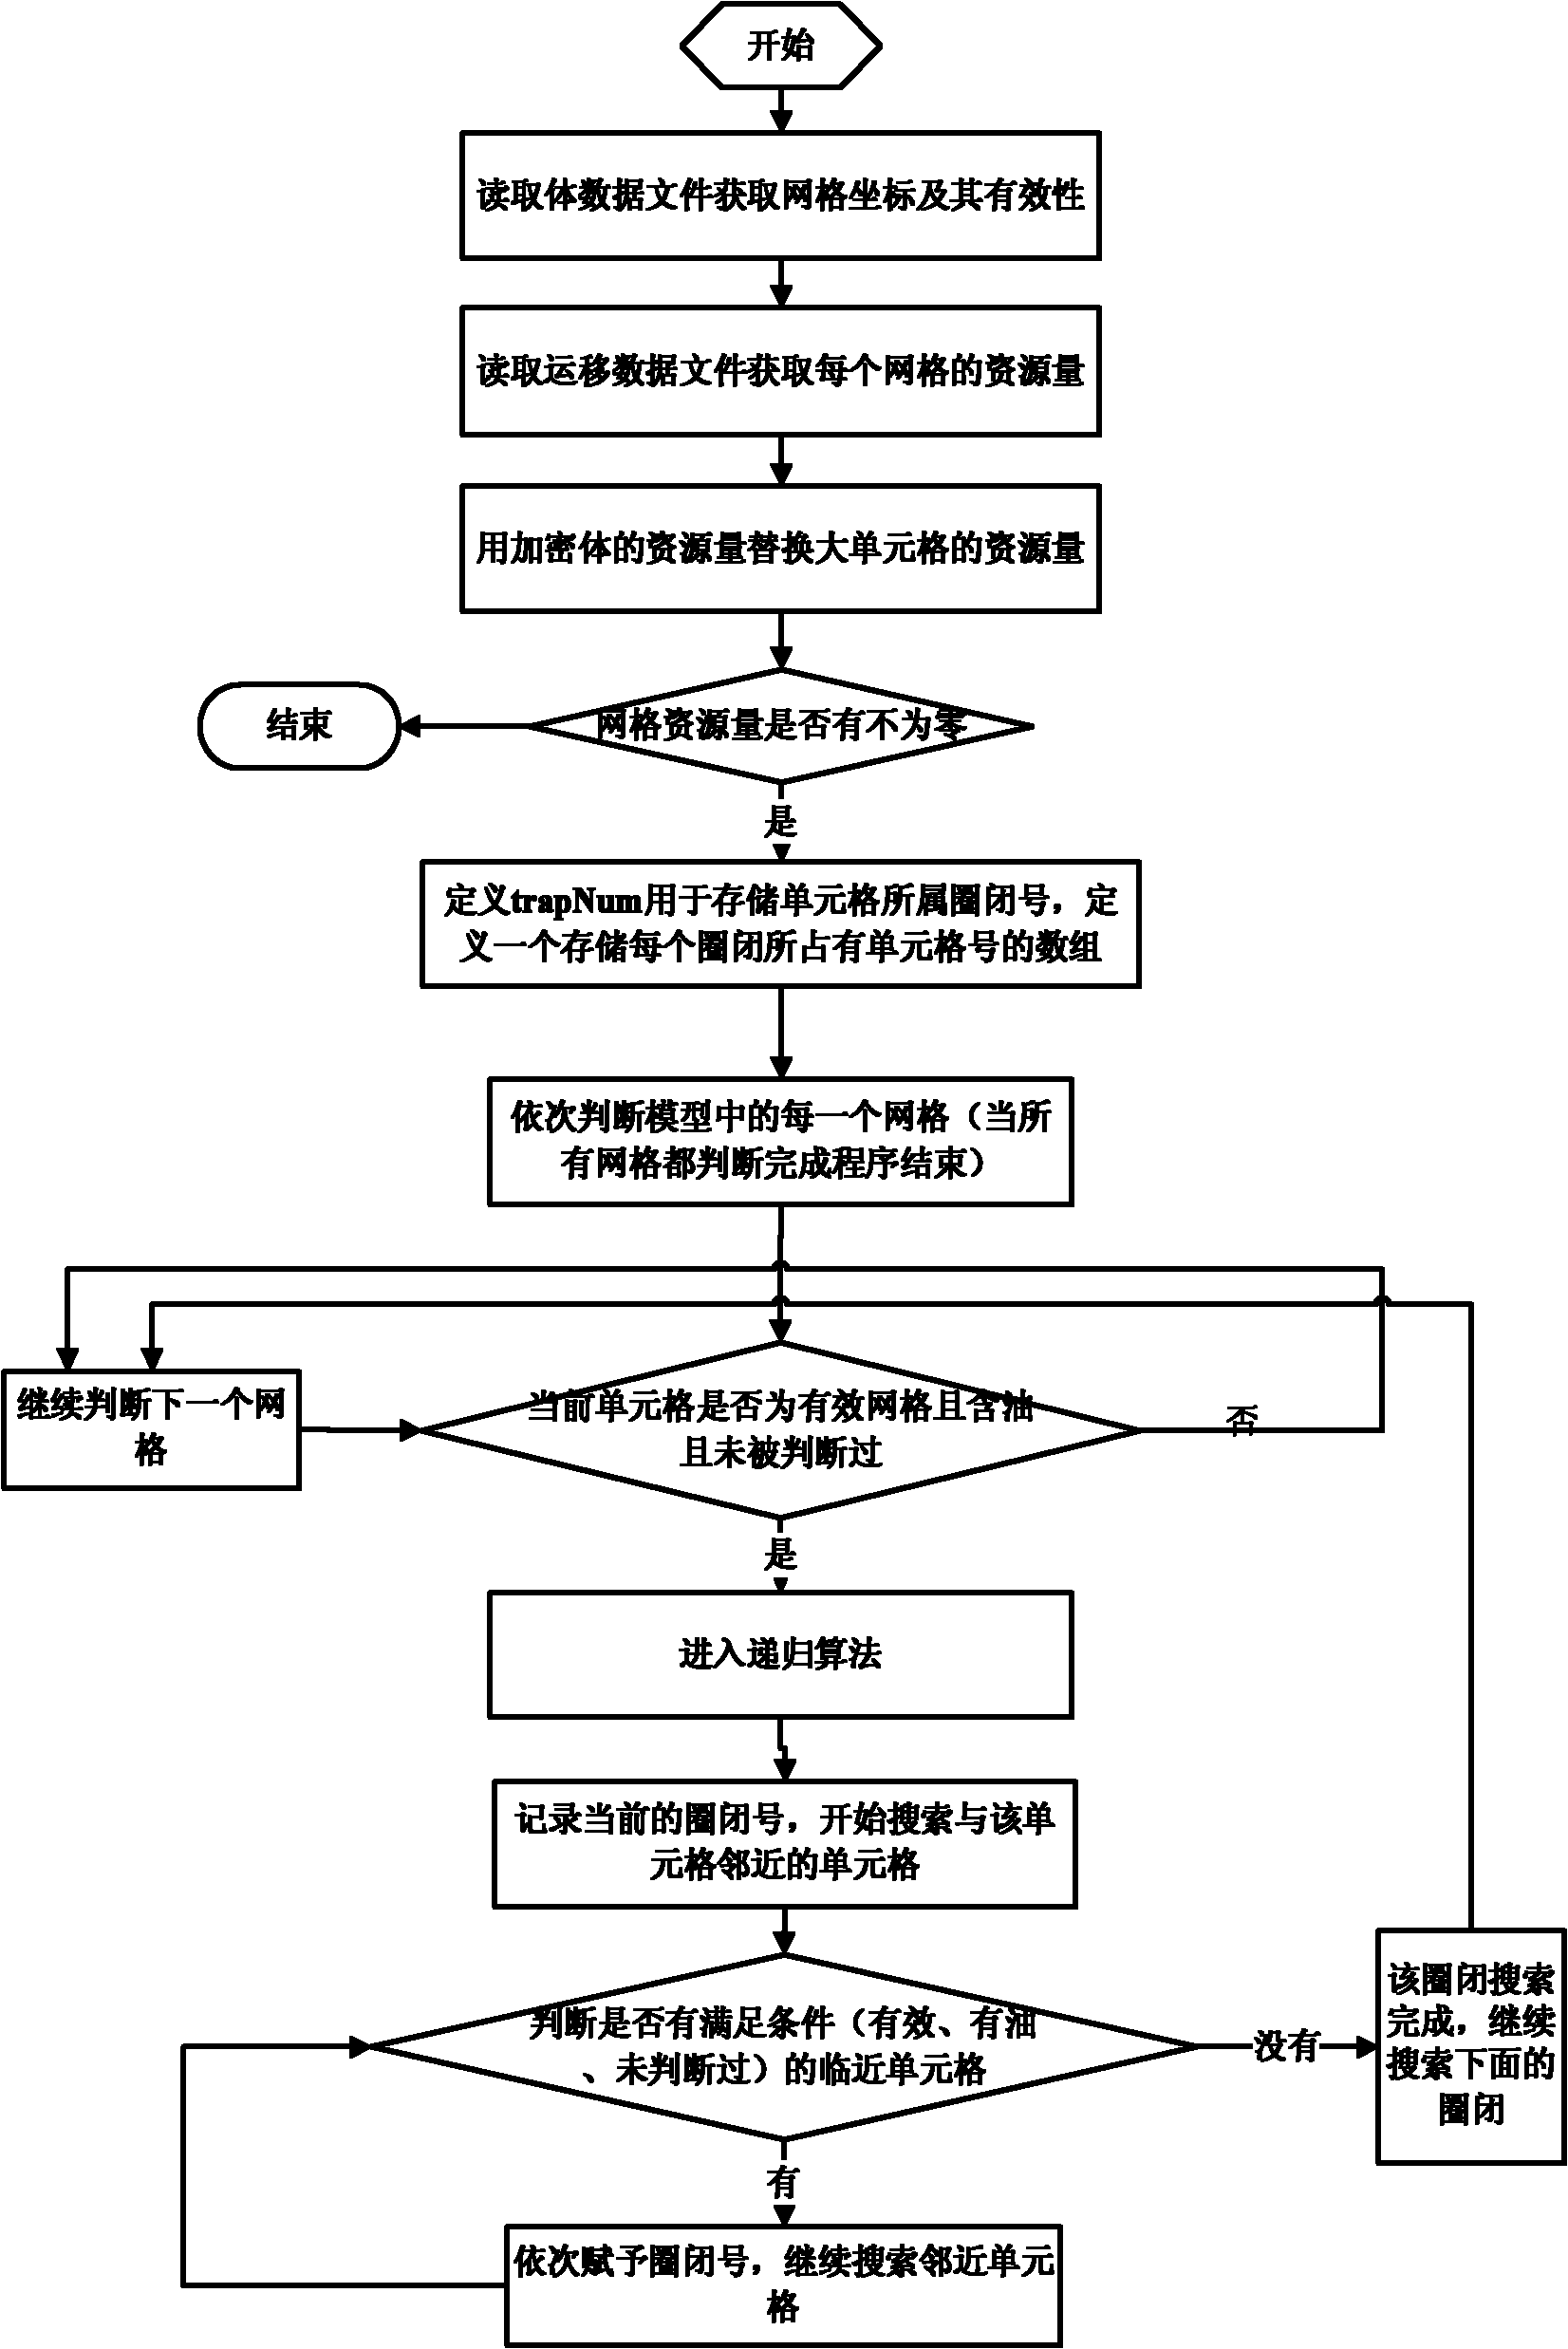 Trap automatic evaluation system and method based on oil and gas accumulation process simulation